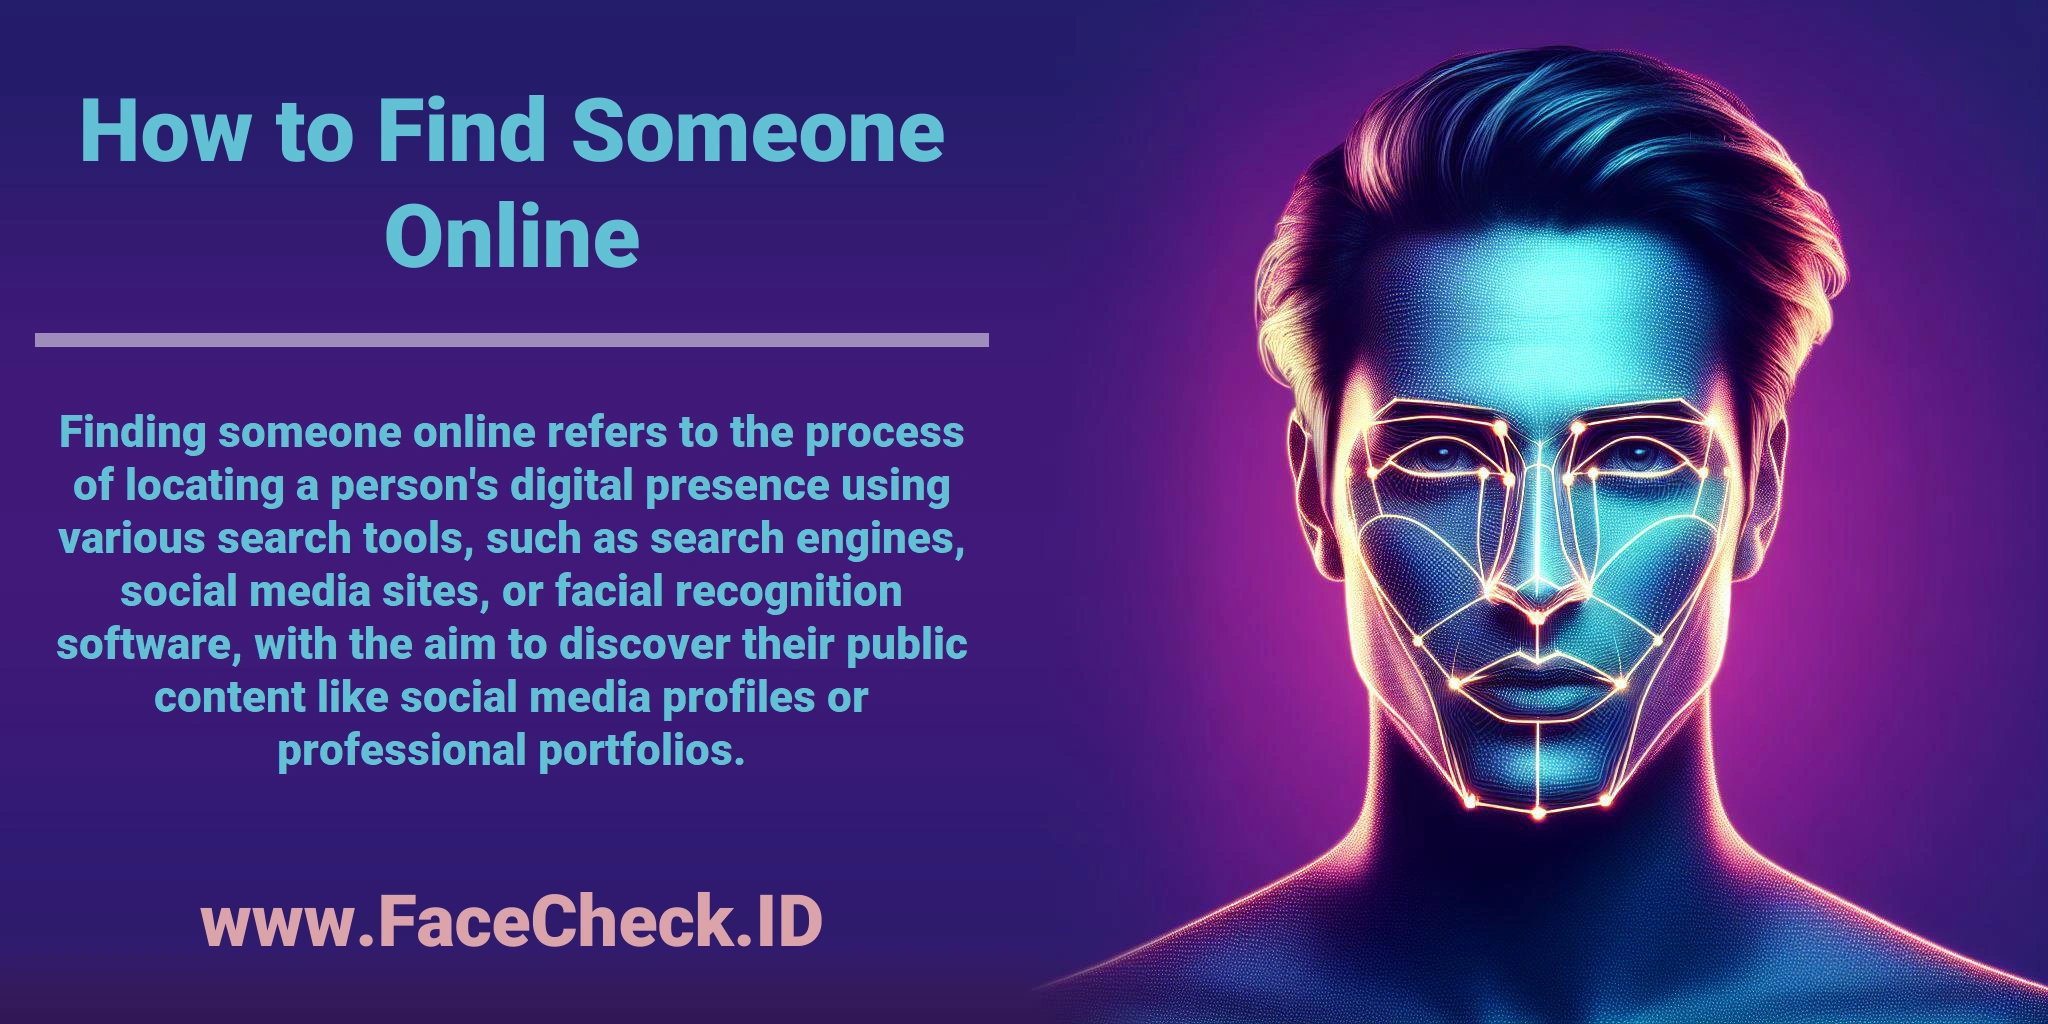 Finding someone online refers to the process of locating a person's digital presence using various search tools, such as search engines, social media sites, or facial recognition software, with the aim to discover their public content like social media profiles or professional portfolios.